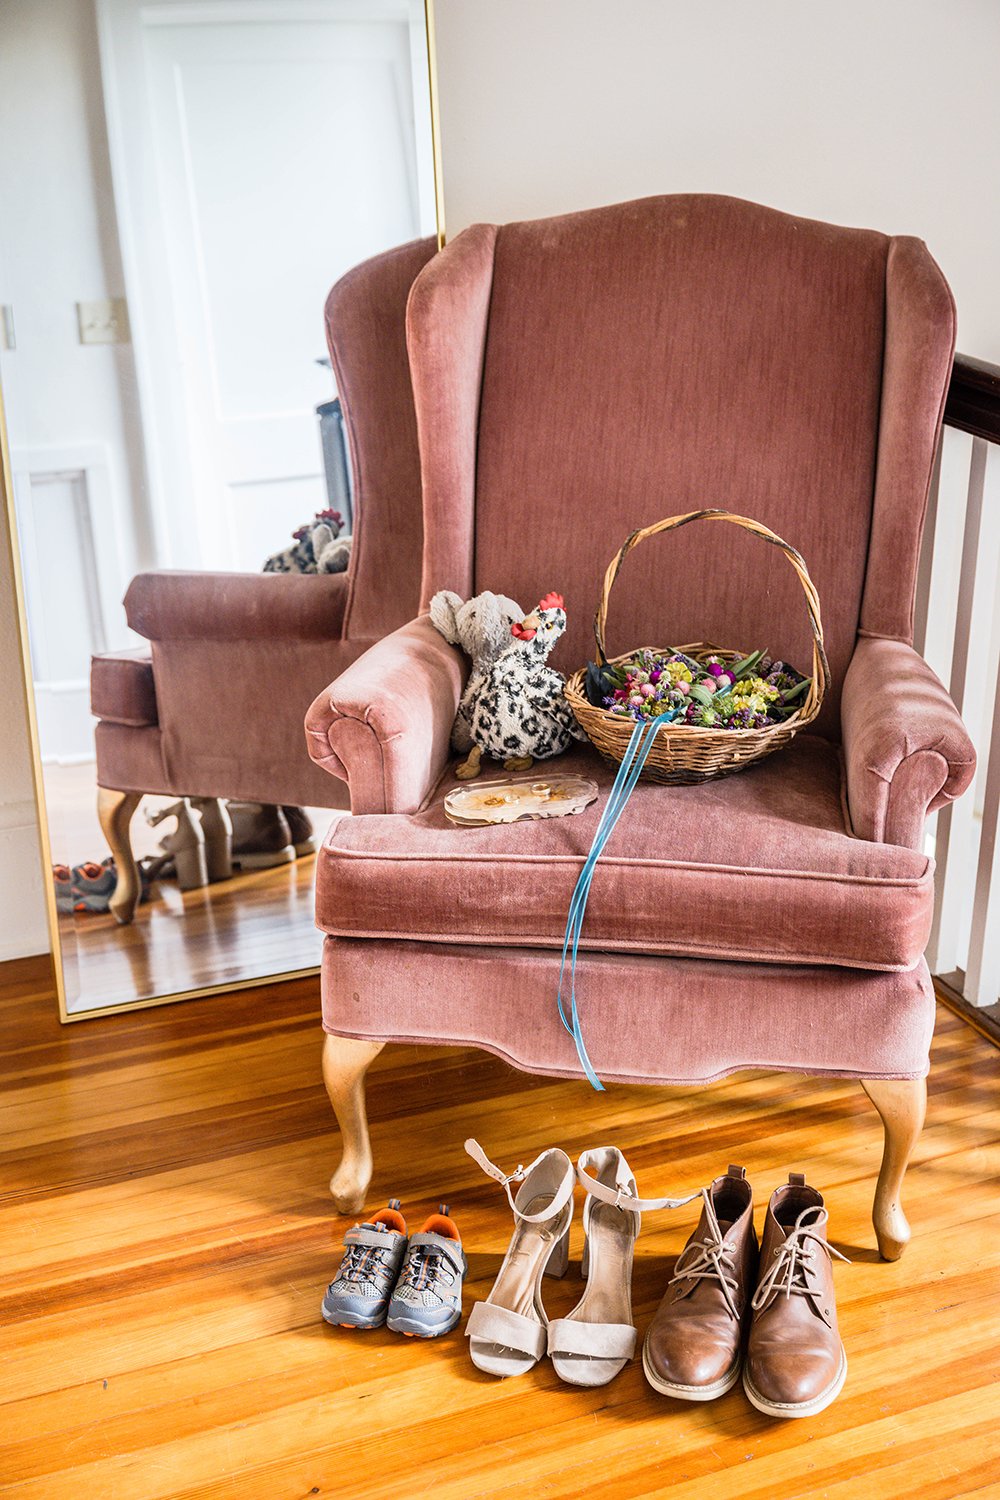 A pink chair in a foyer holds a basket full of flower crowns tied together with blue ribbon and two stuffed animals with three pairs of shoes in front.